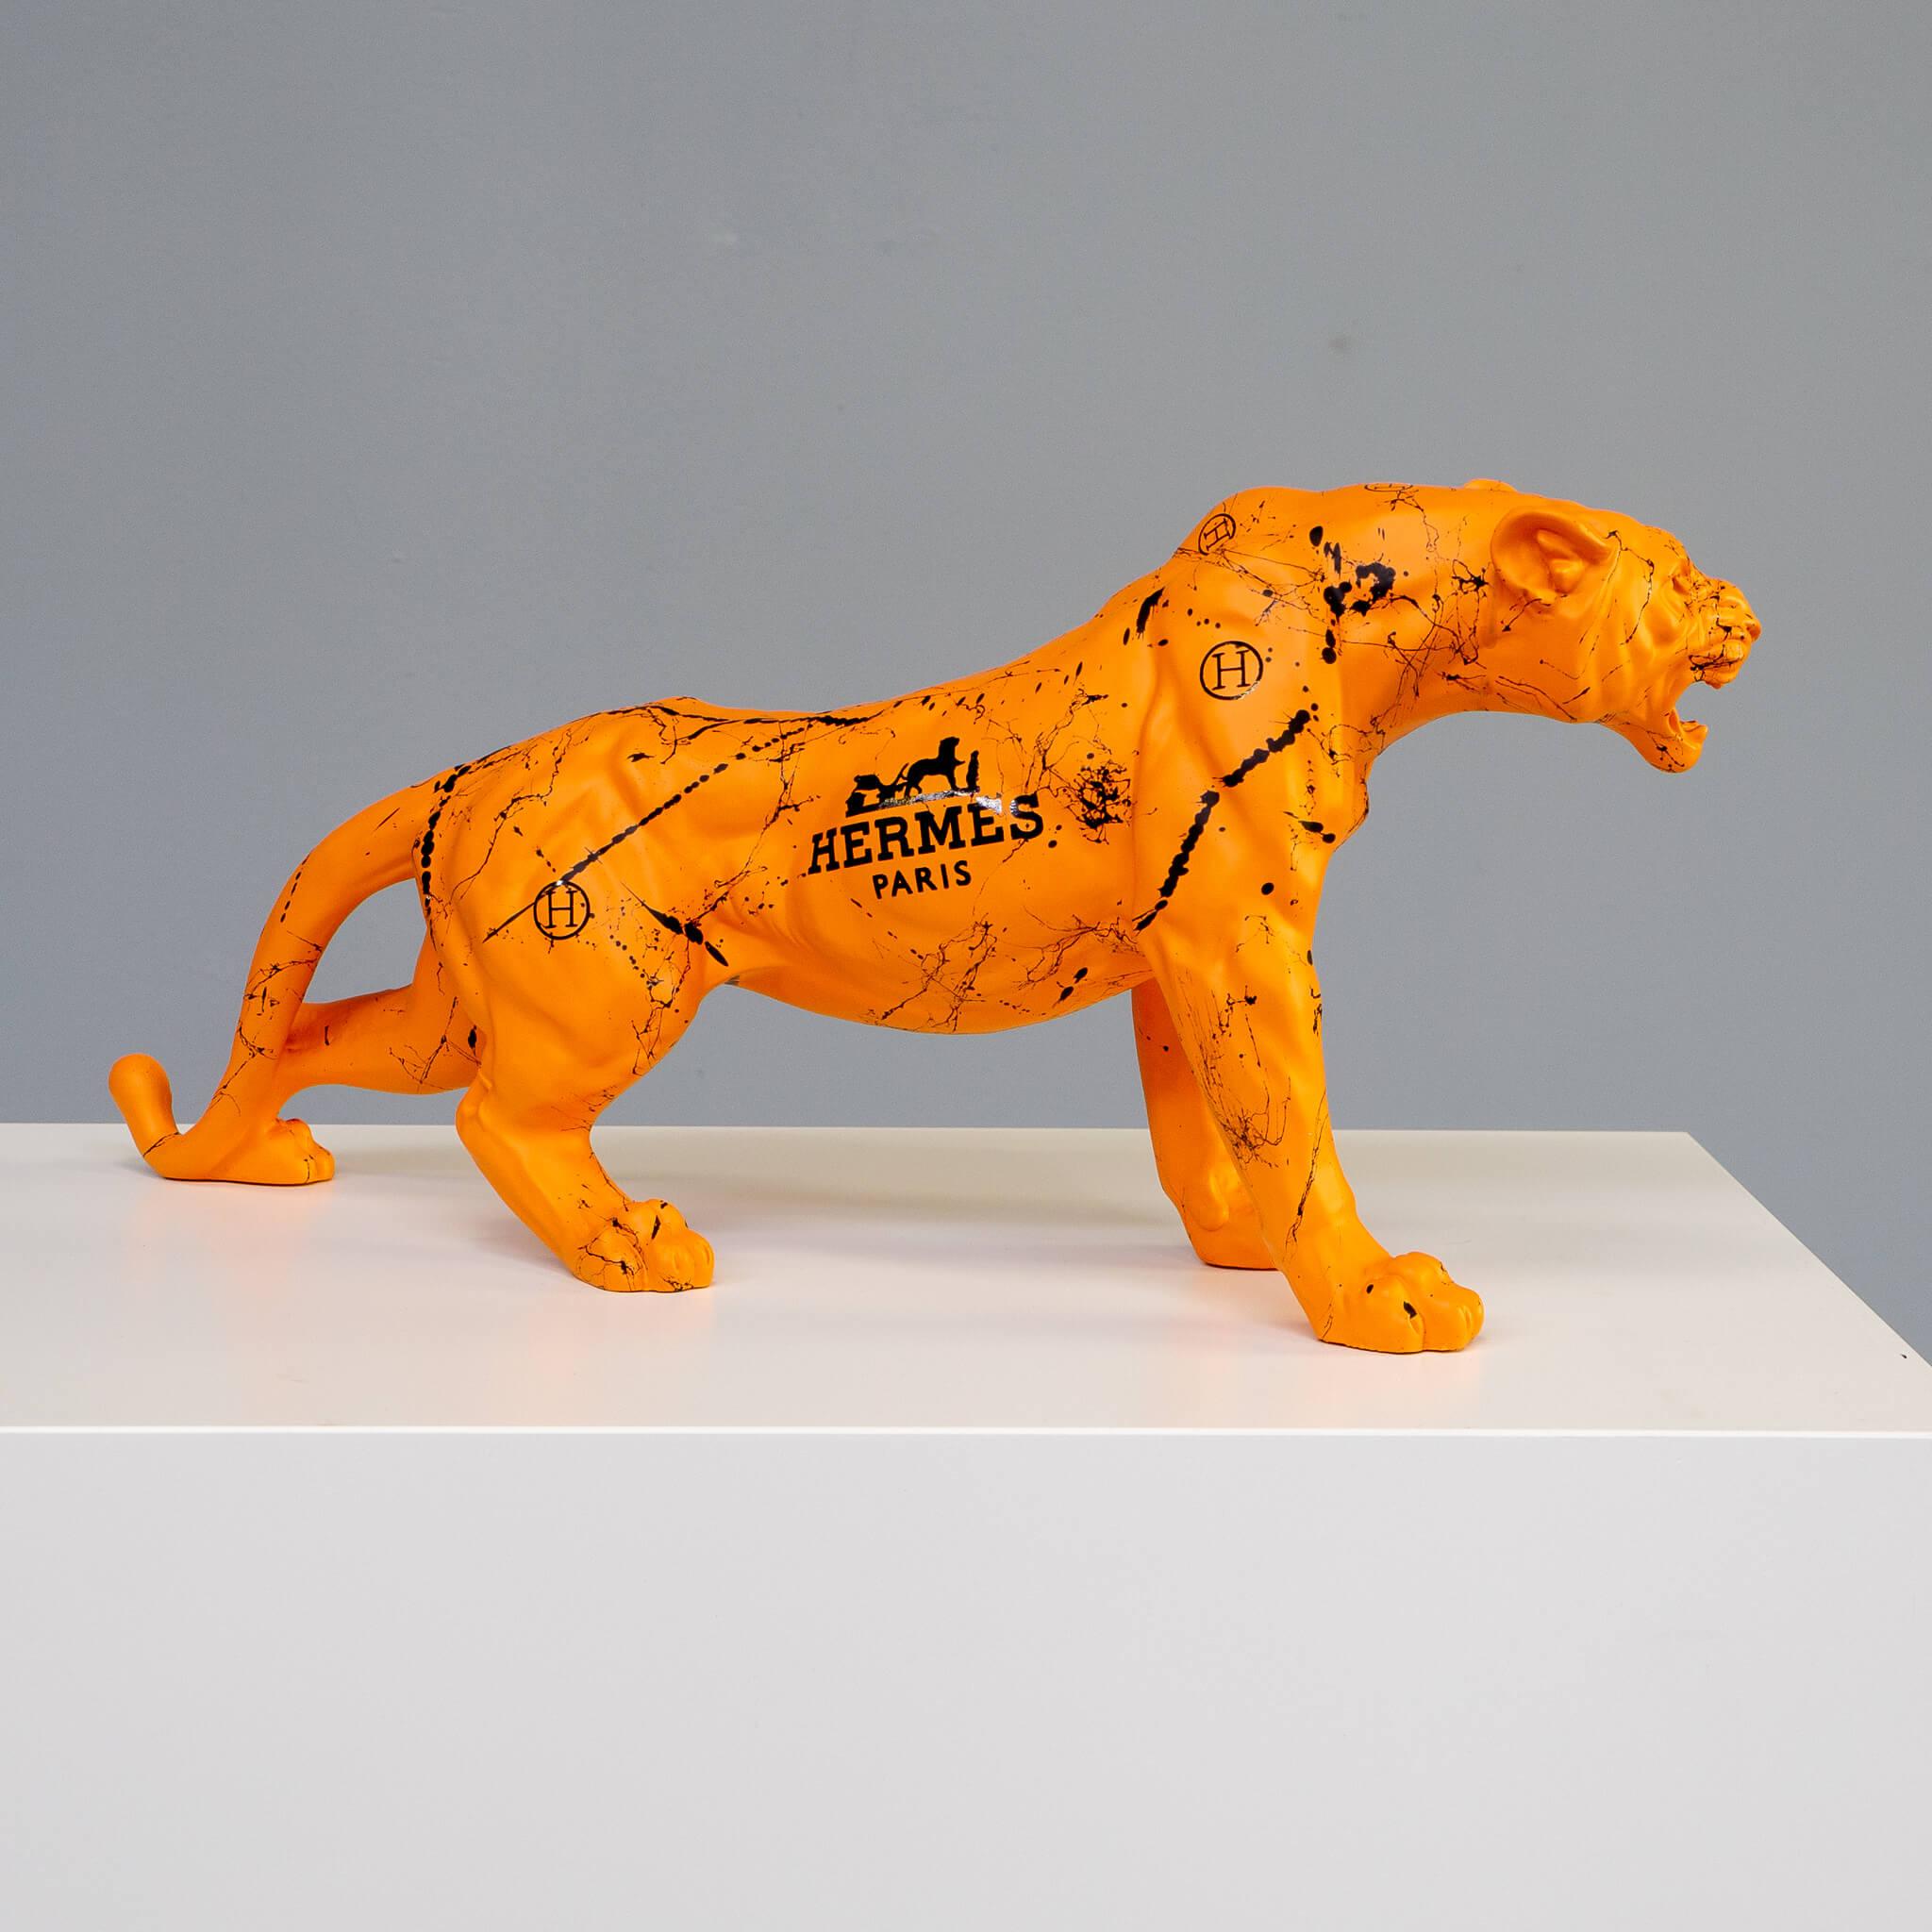 French Edwart “Hermés Feline 8/10′ Panther for Hermes For Sale